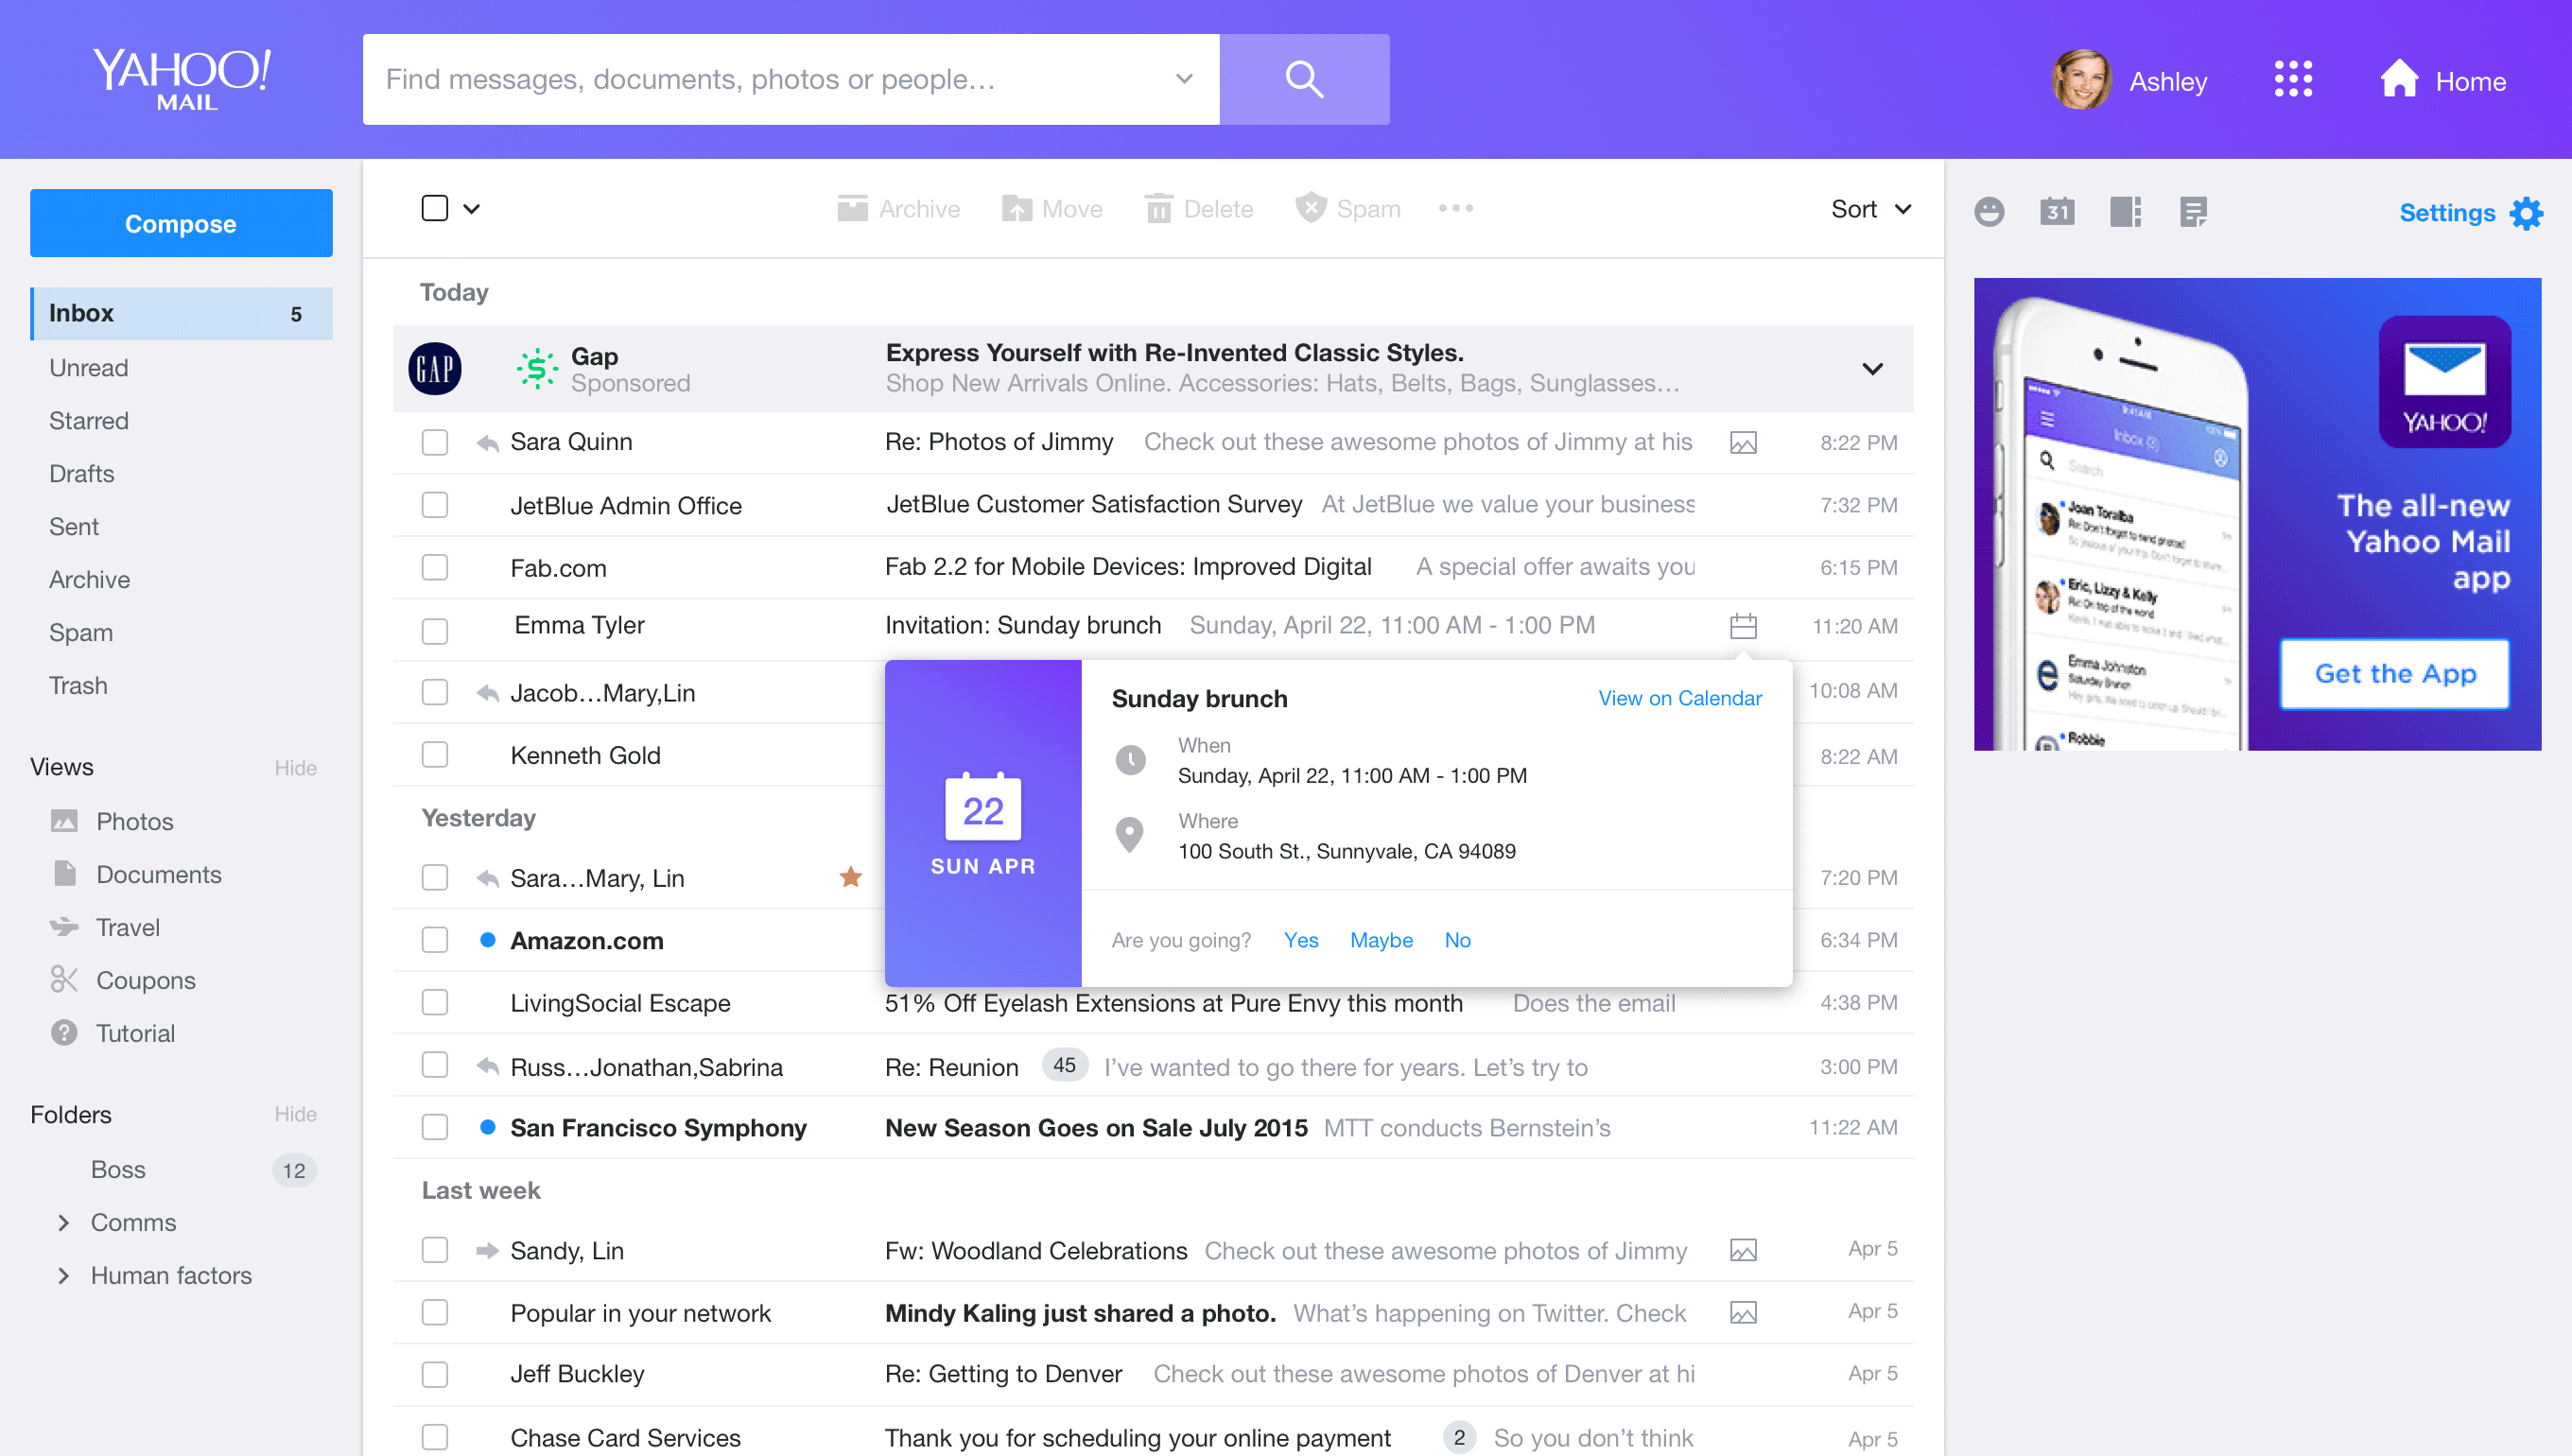 Yahoo Mail launches new wave of updates with faster loads, photo themes, RSVPs, improved OOO • TechCrunch